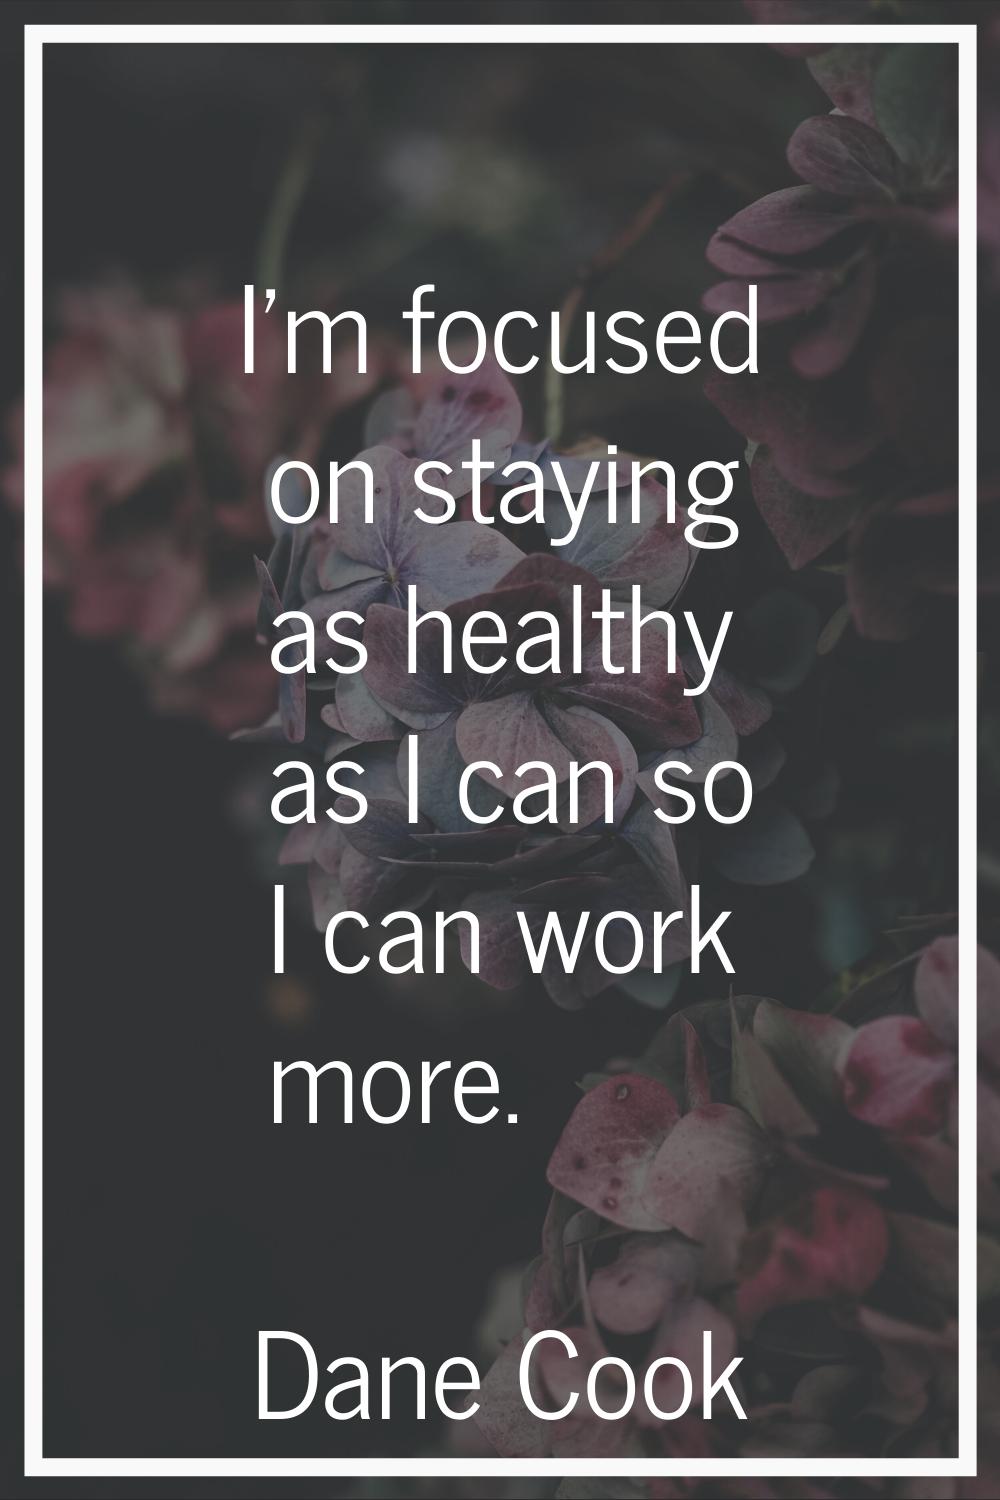 I'm focused on staying as healthy as I can so I can work more.